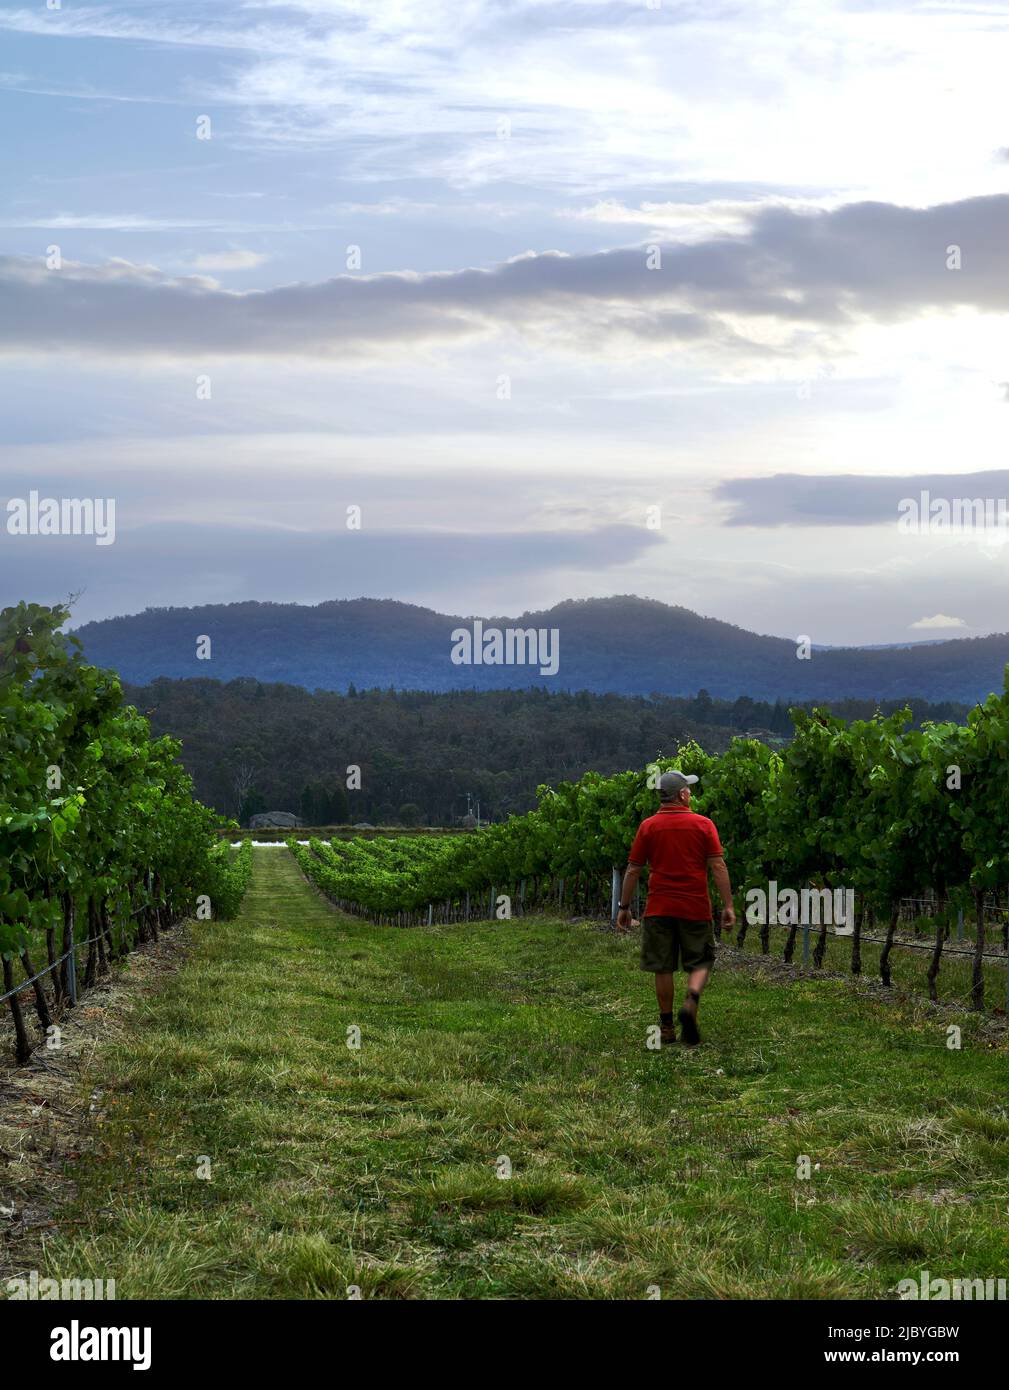 Man walking down rows of grapevines laden with grapes checking vines Stock Photo